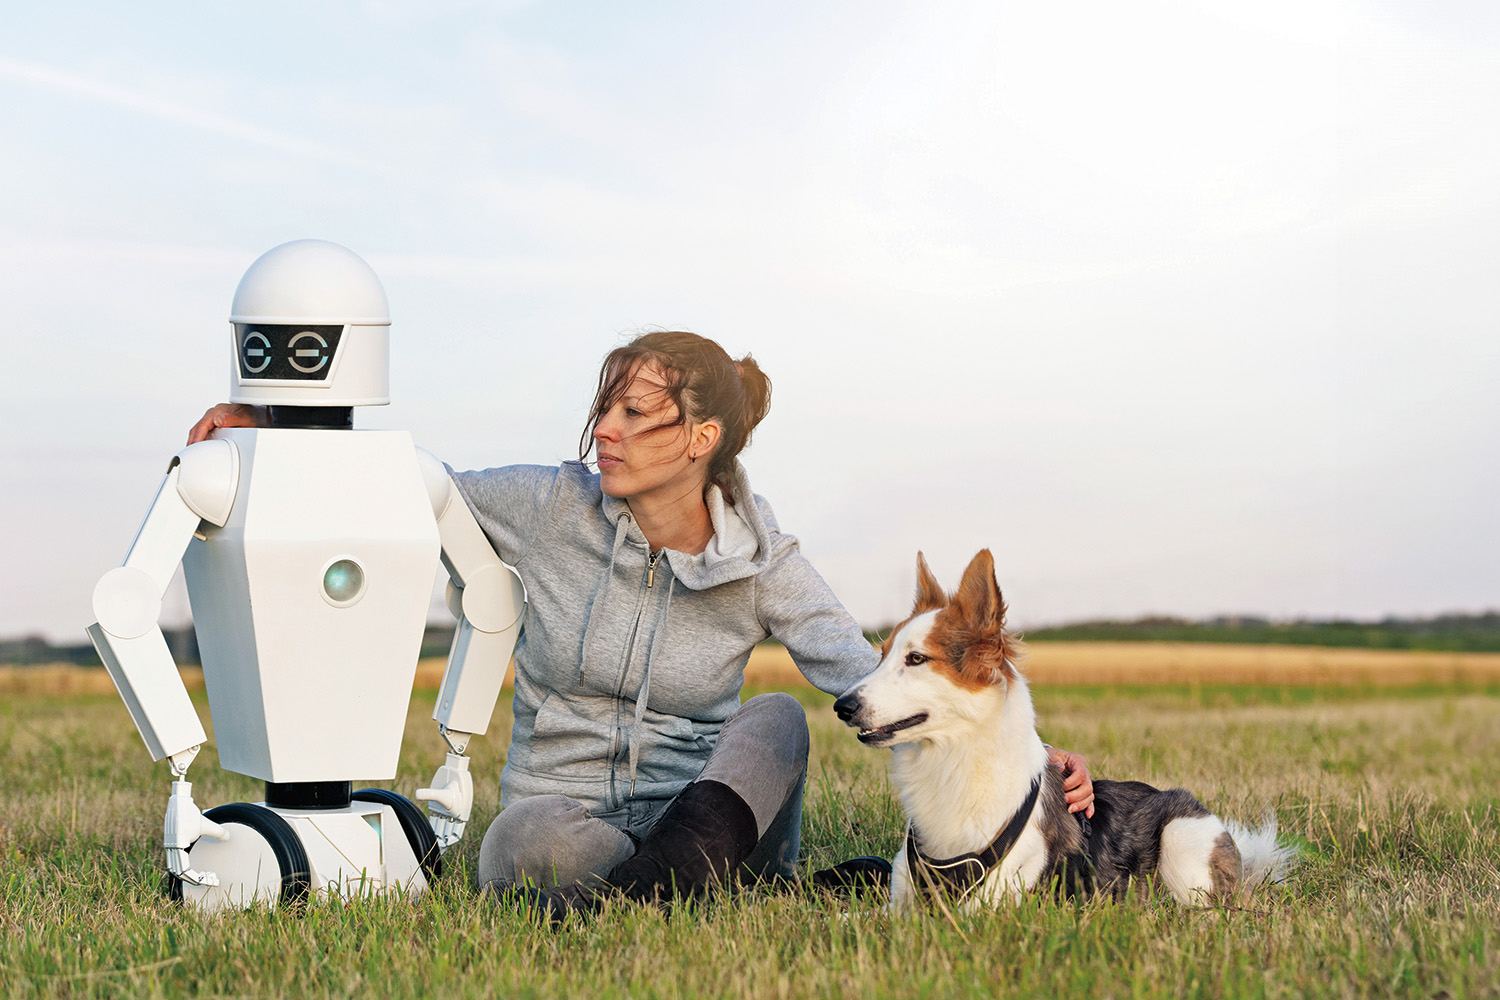 A person sitting in a field with their arms around a dog on their right and a robot on their left.